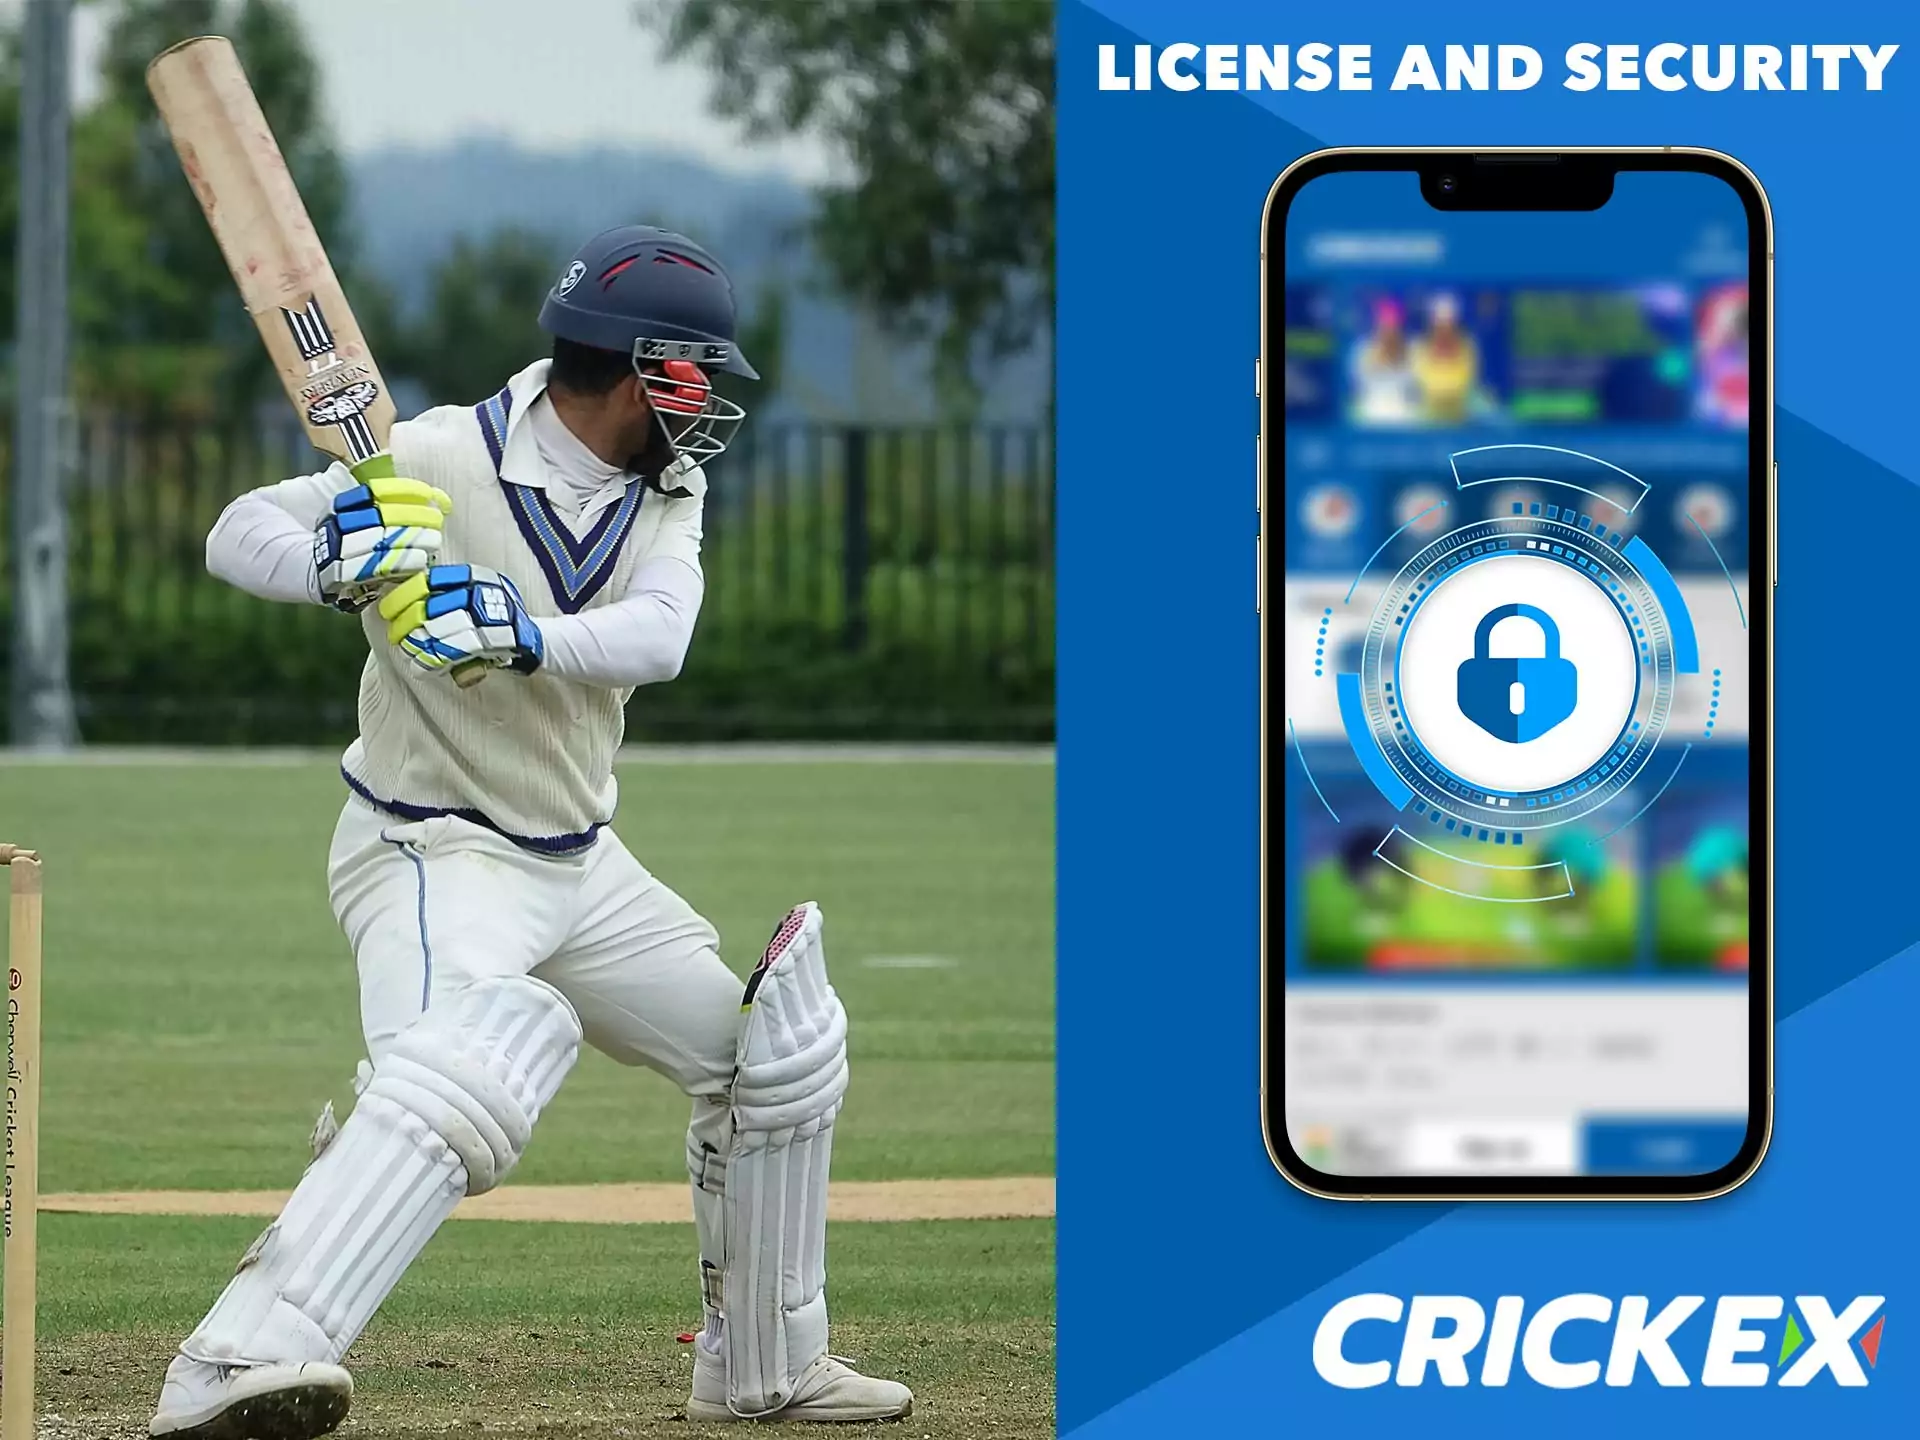 Crickex is legally operating in India under a Curacao license.